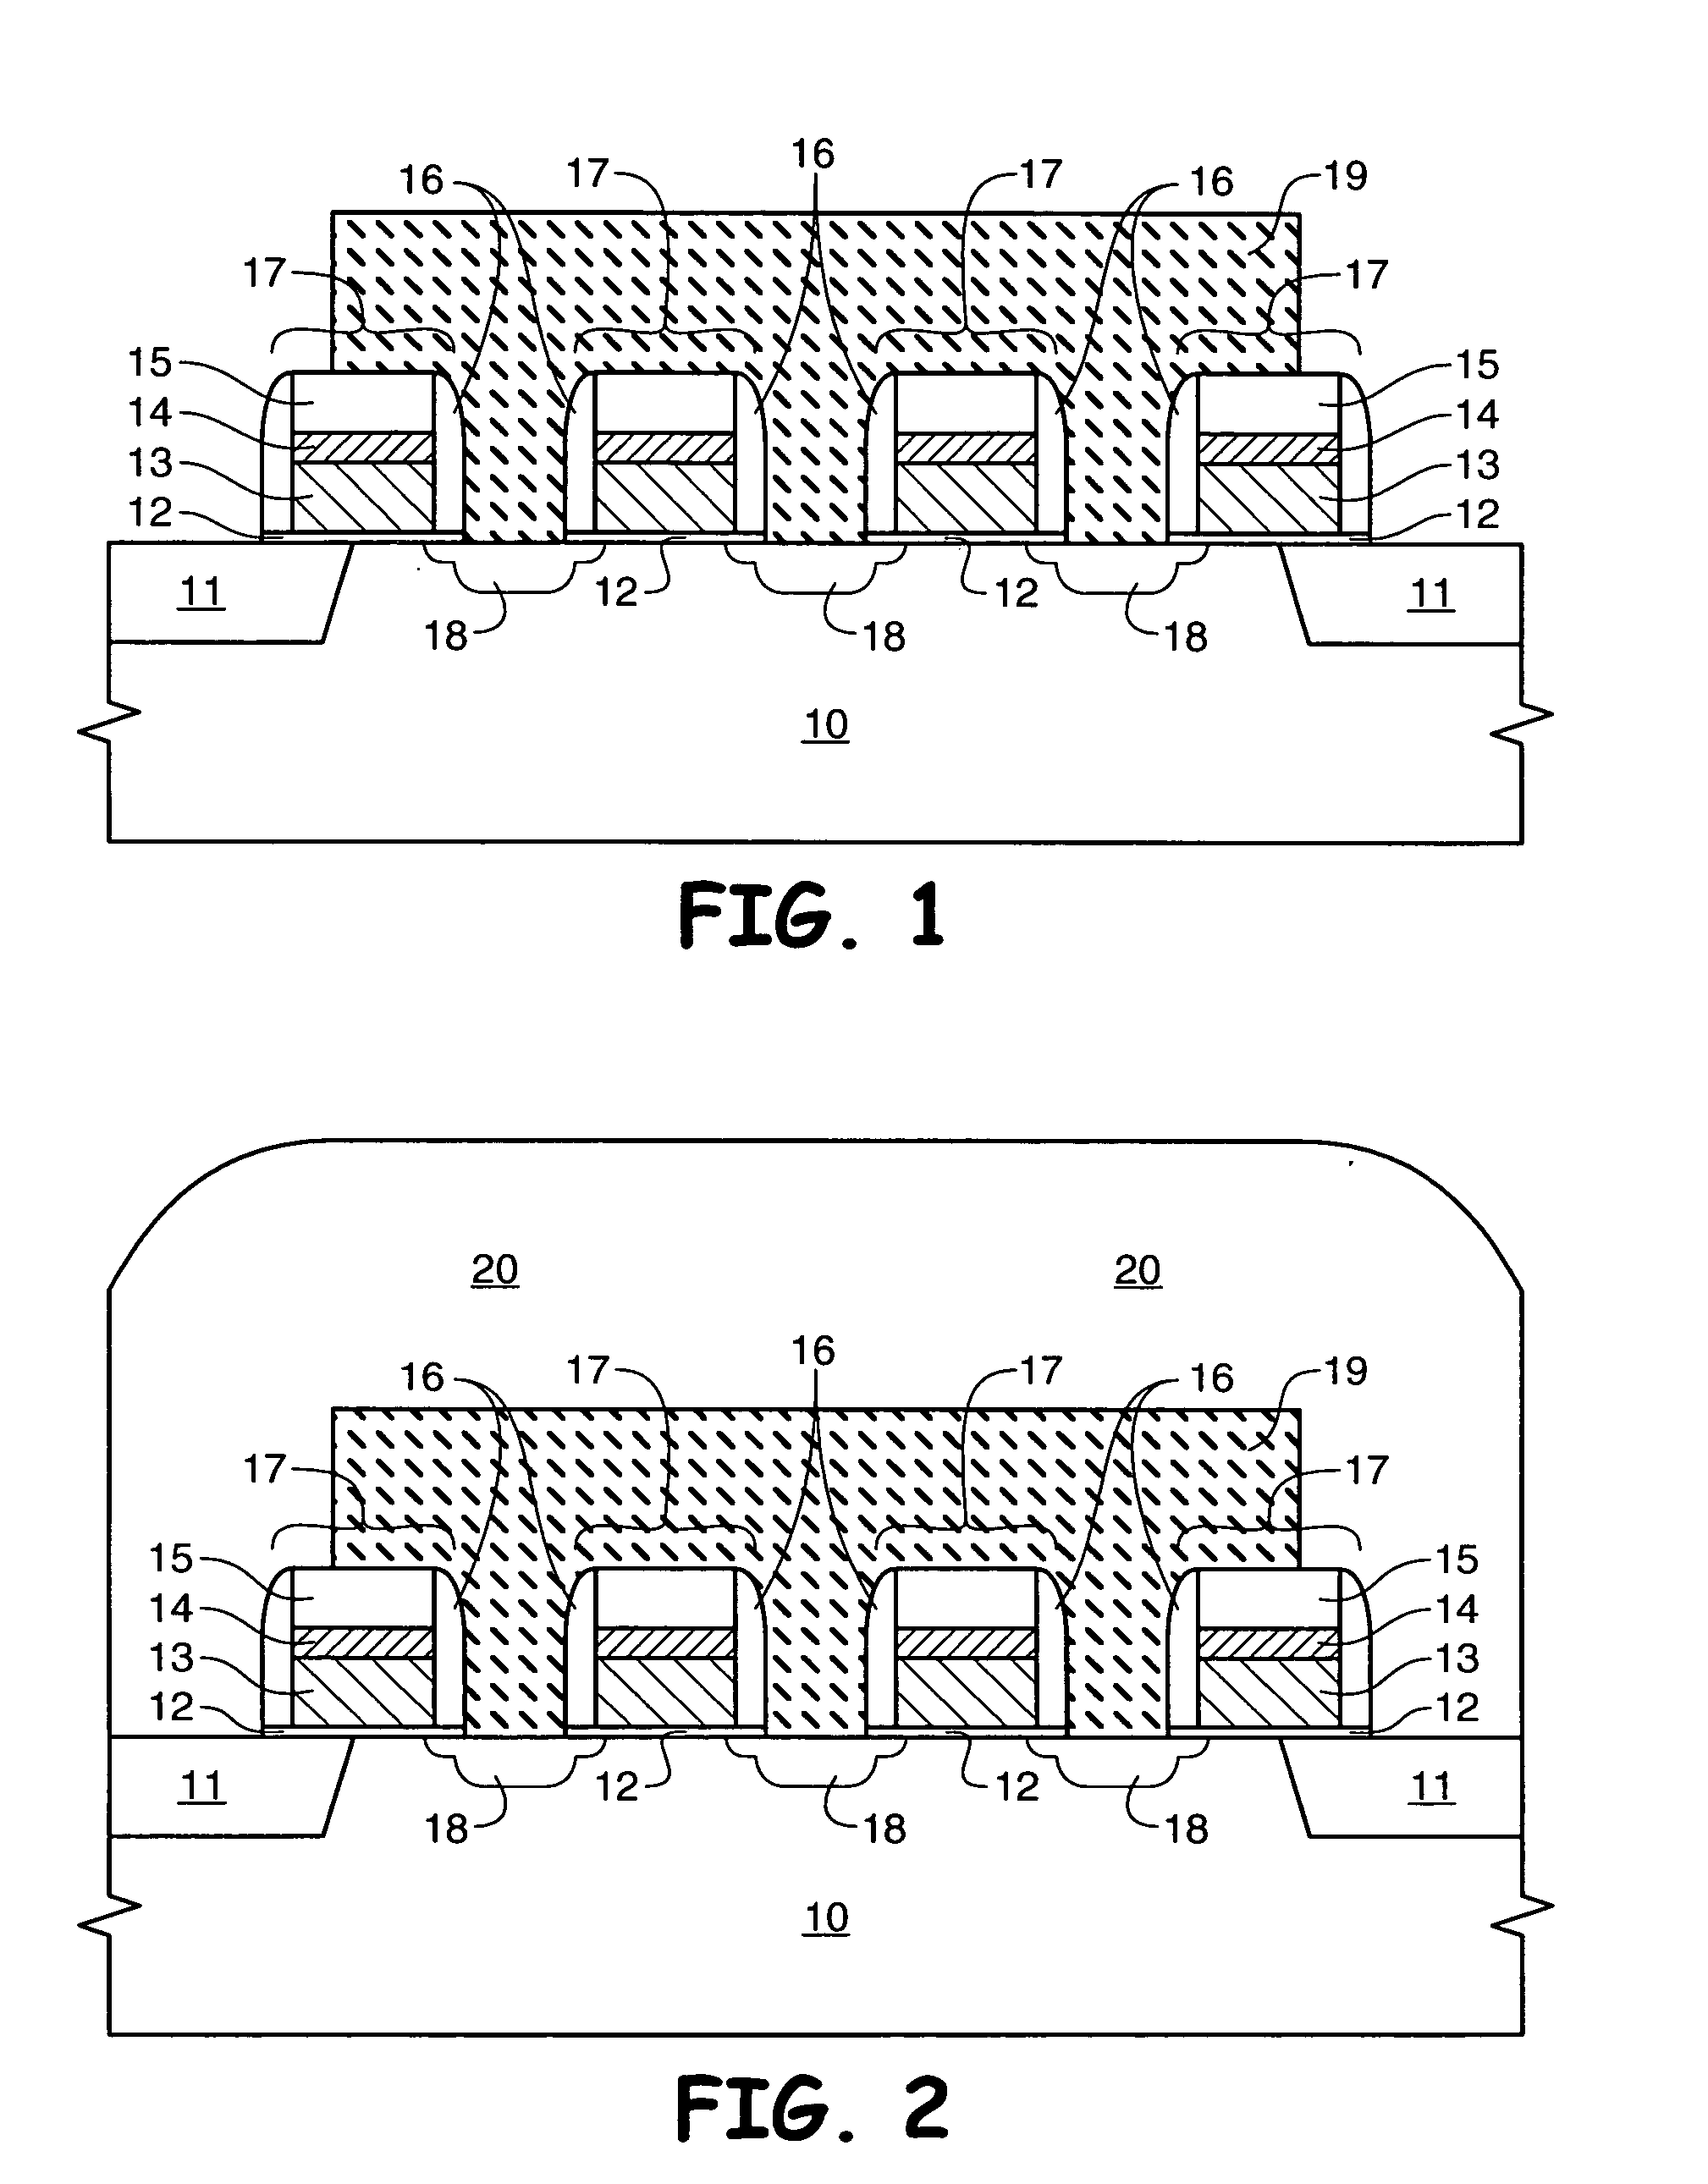 Formation of self-aligned contact plugs